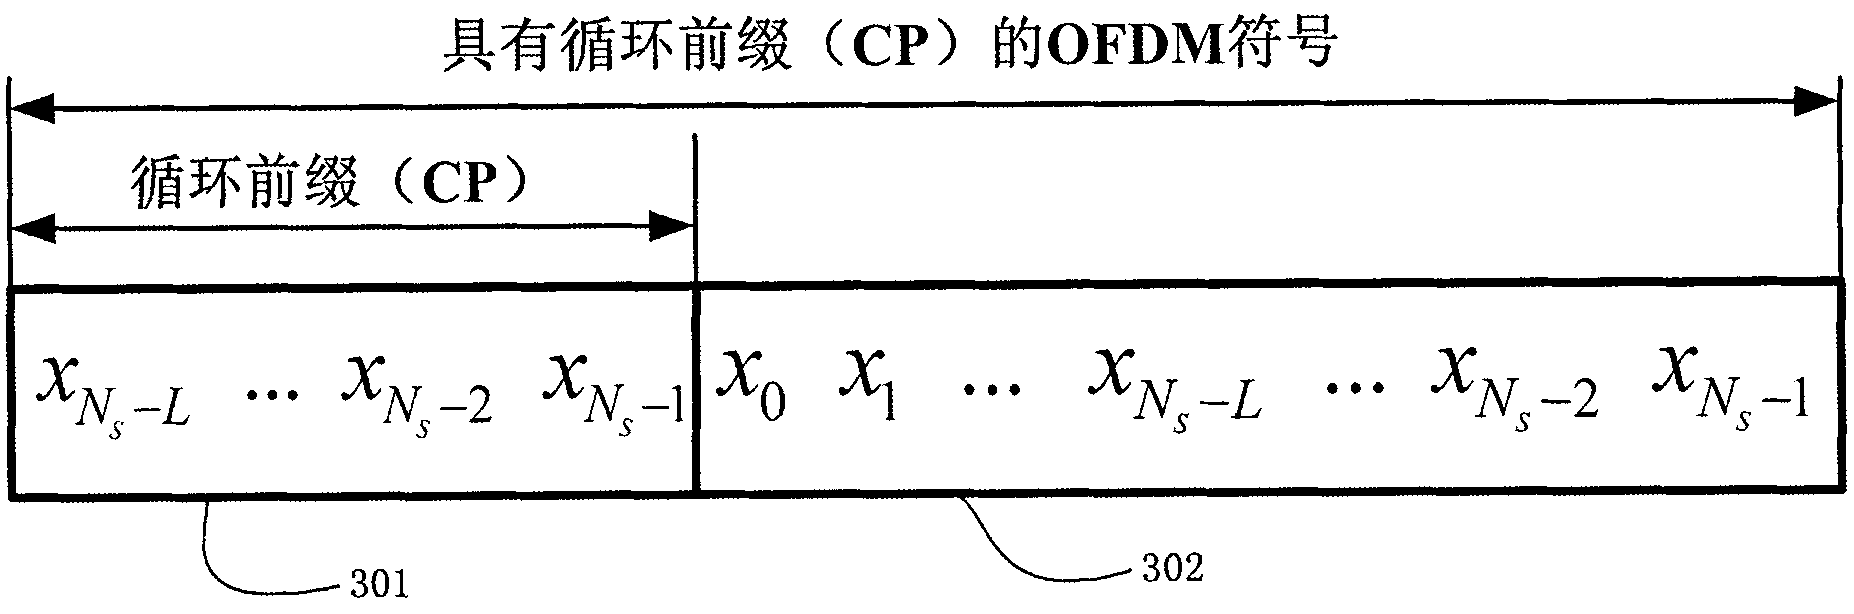 Cyclic prefix (CP) and virtual carrier based blind frequency offset estimation method in OFDM (Orthogonal Frequency Division Multiplexing) system